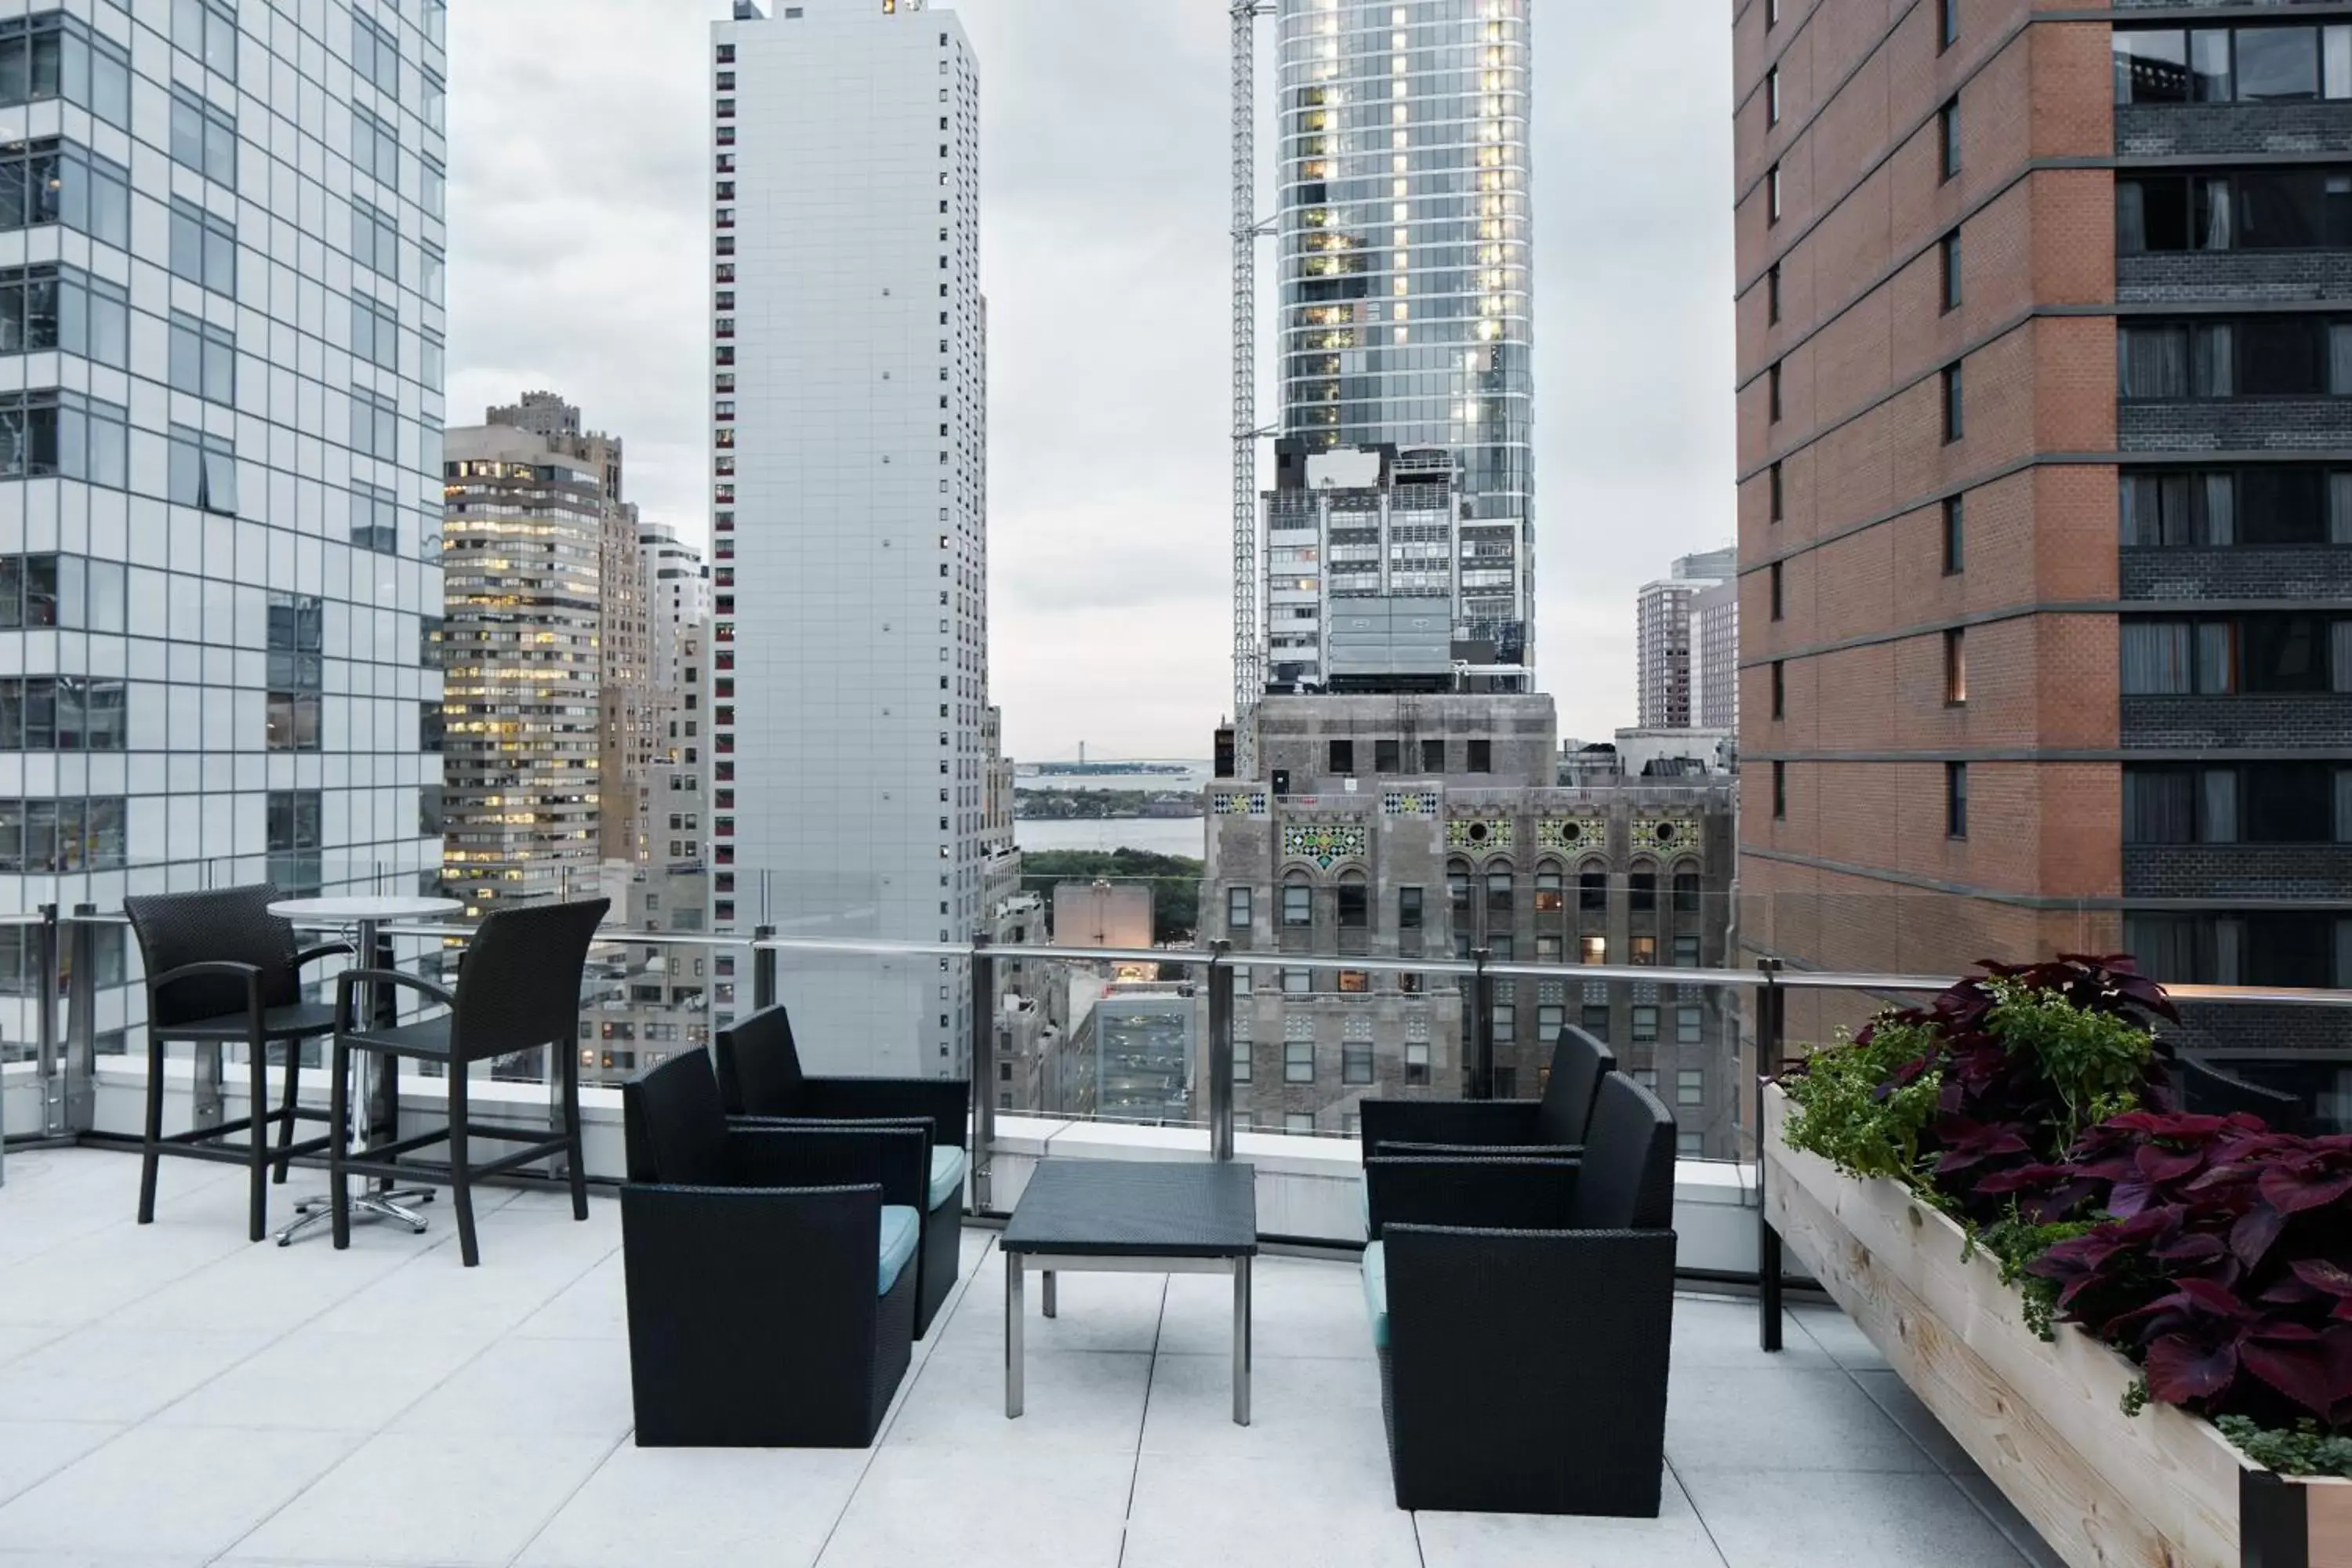 View (from property/room), Patio/Outdoor Area in Club Quarters Hotel World Trade Center, New York